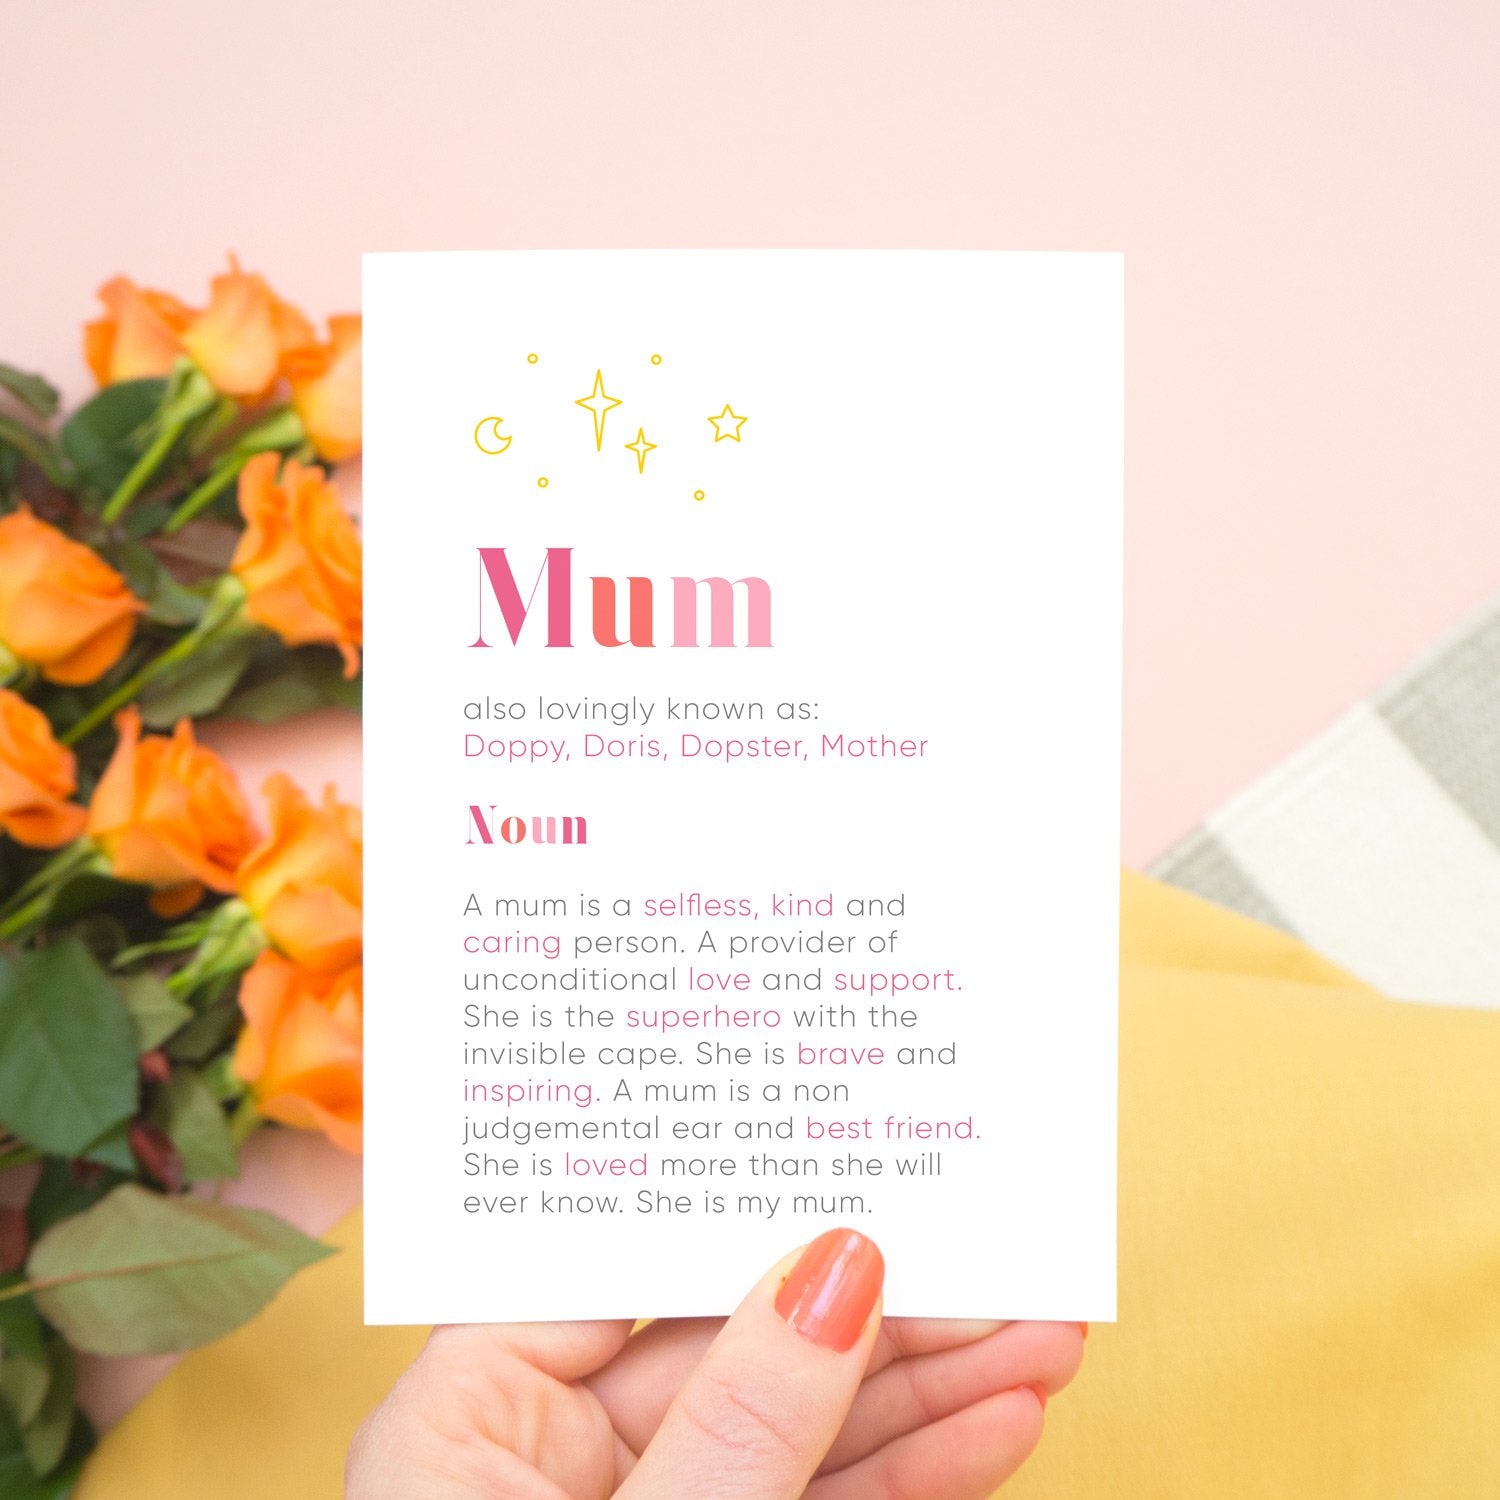 A personalised mum dictionary definition card by Joanne Hawker featuring personalised nicknames and a definition tailored to your mum!